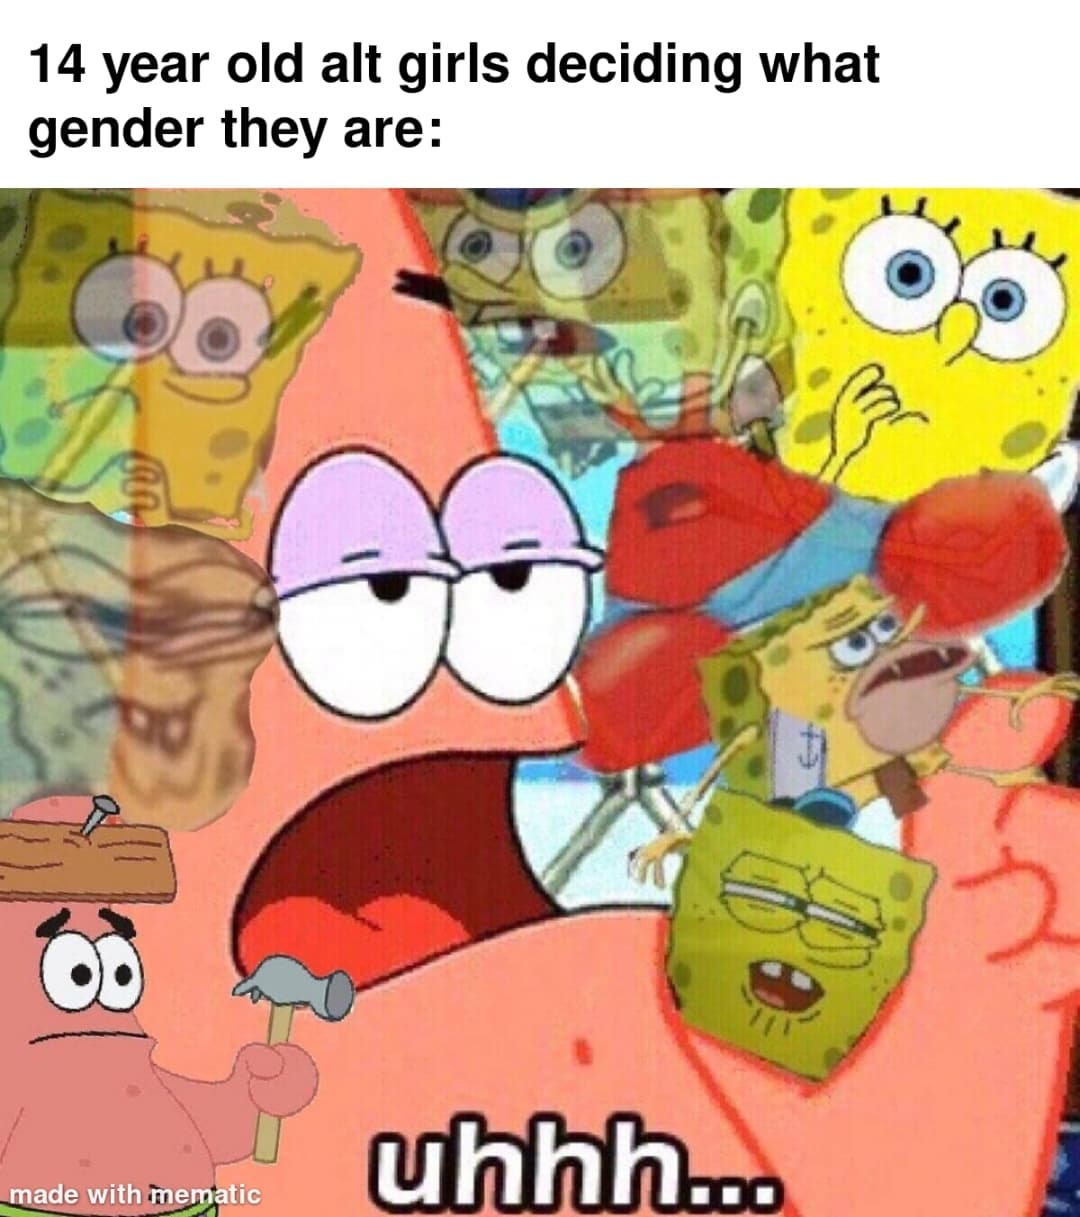 14 year old alt girls deciding what gender they are: Uhhh...